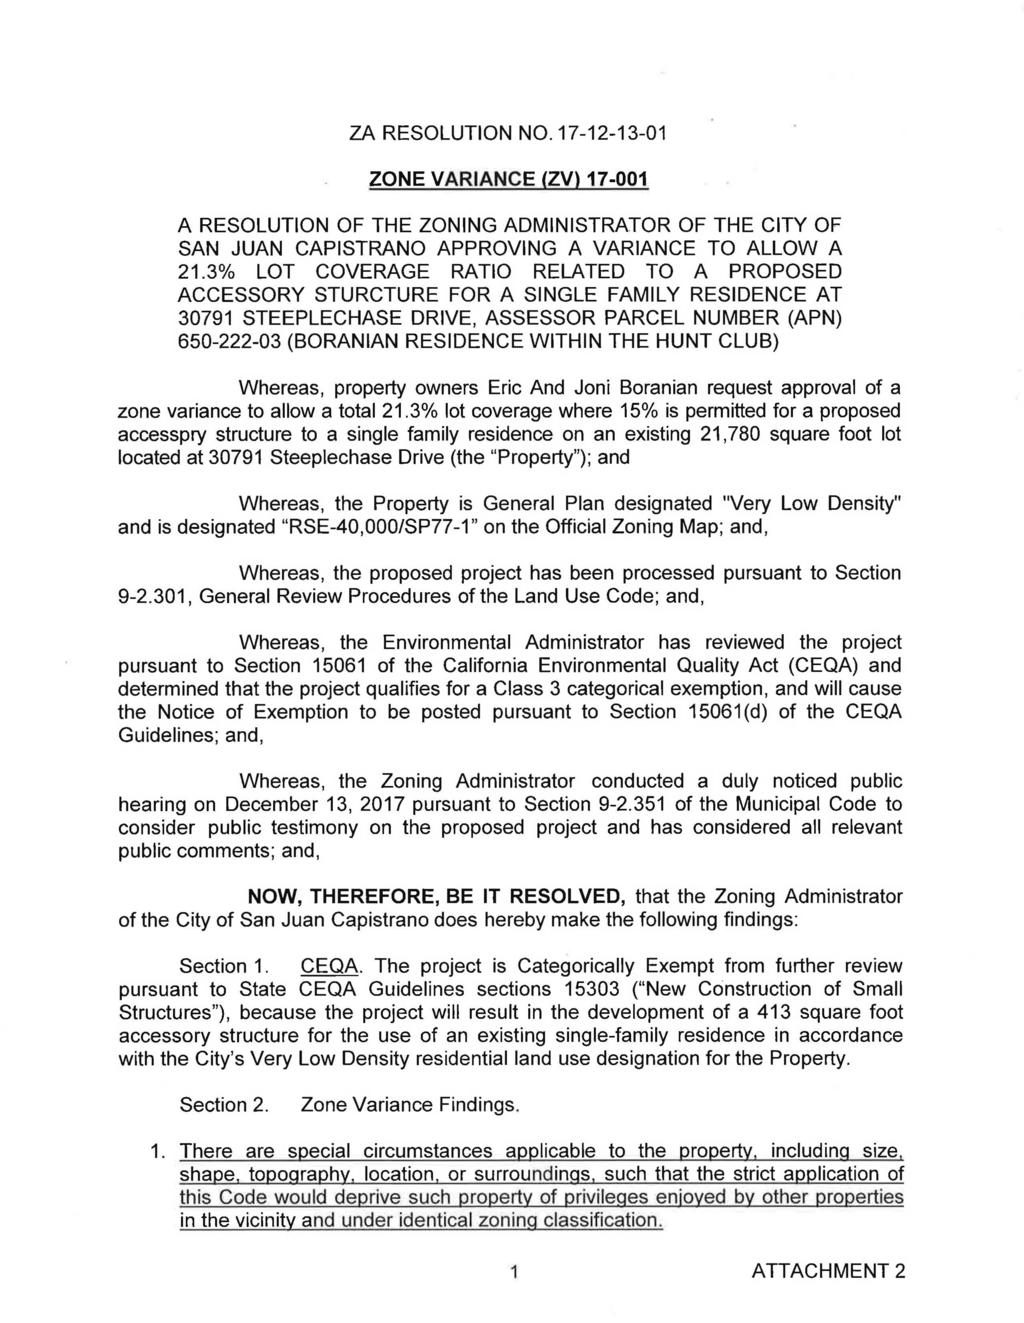 ZA RESOLUTION NO. 17-12-13-01 ZONE VARIANCE (ZV) 17-001 A RESOLUTION OF THE ZONING ADMINISTRATOR OF THE CITY OF SAN JUAN CAPISTRANO APPROVING A VARIANCE TO ALLOW A 21.